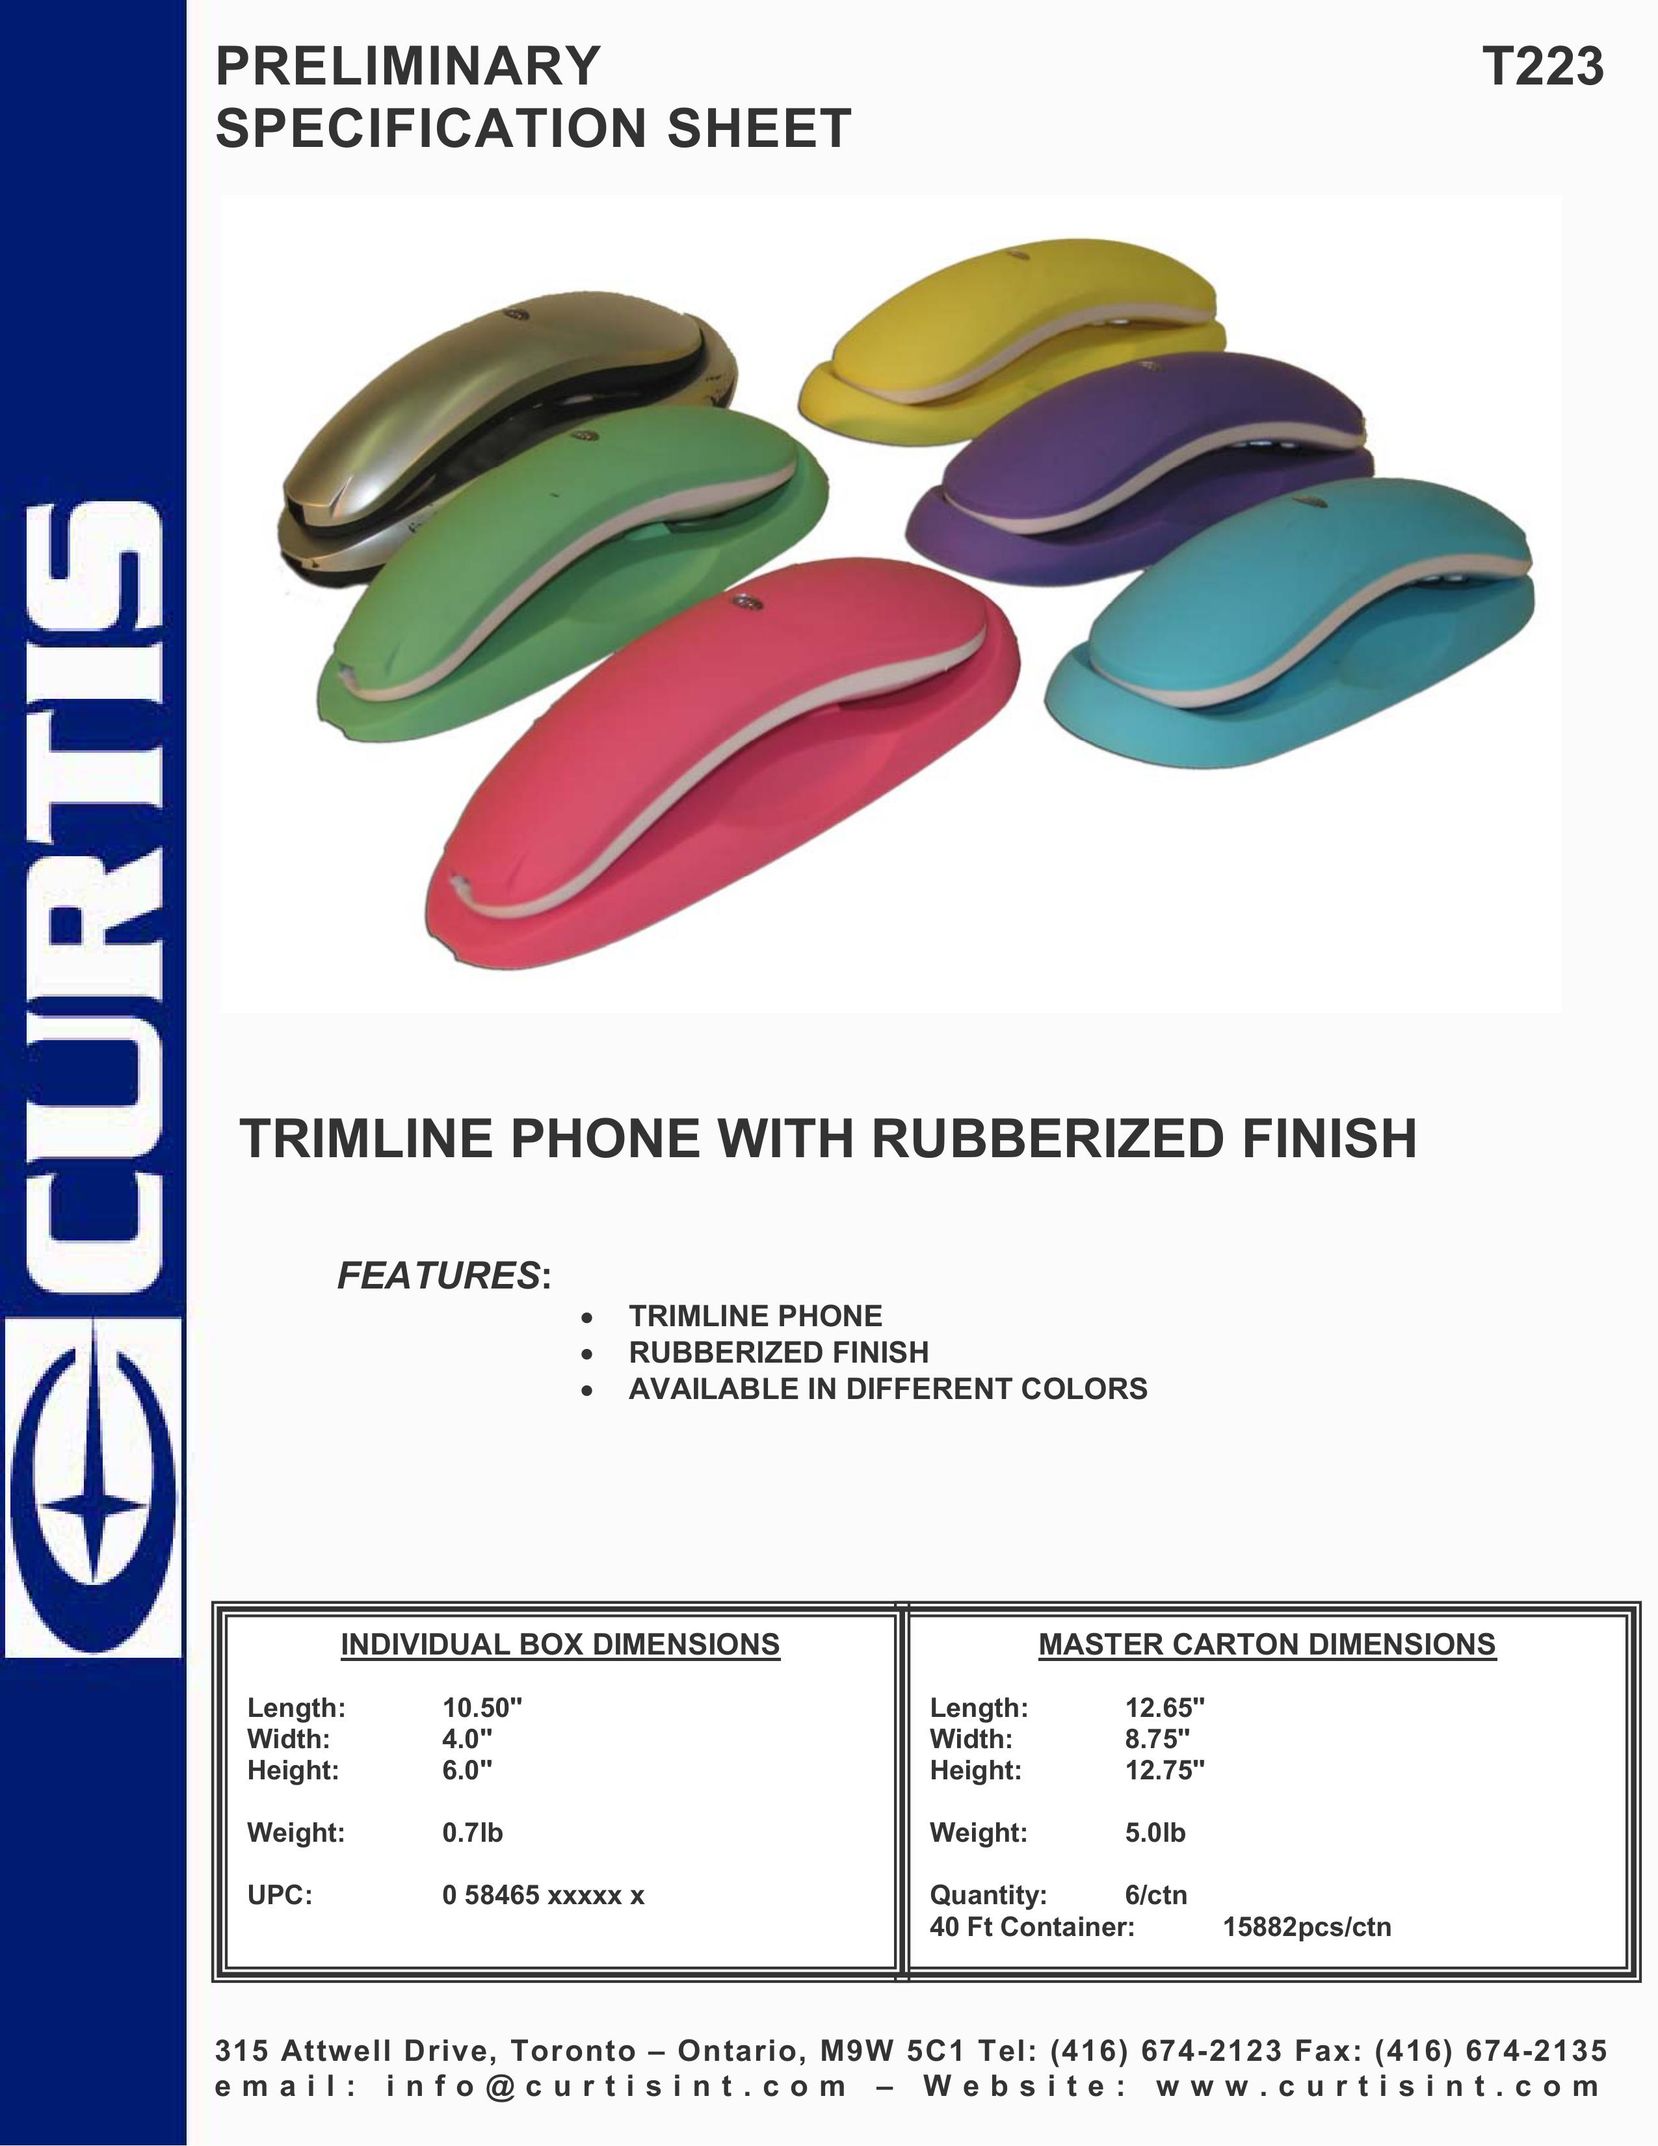 Curtis T223 Telephone User Manual